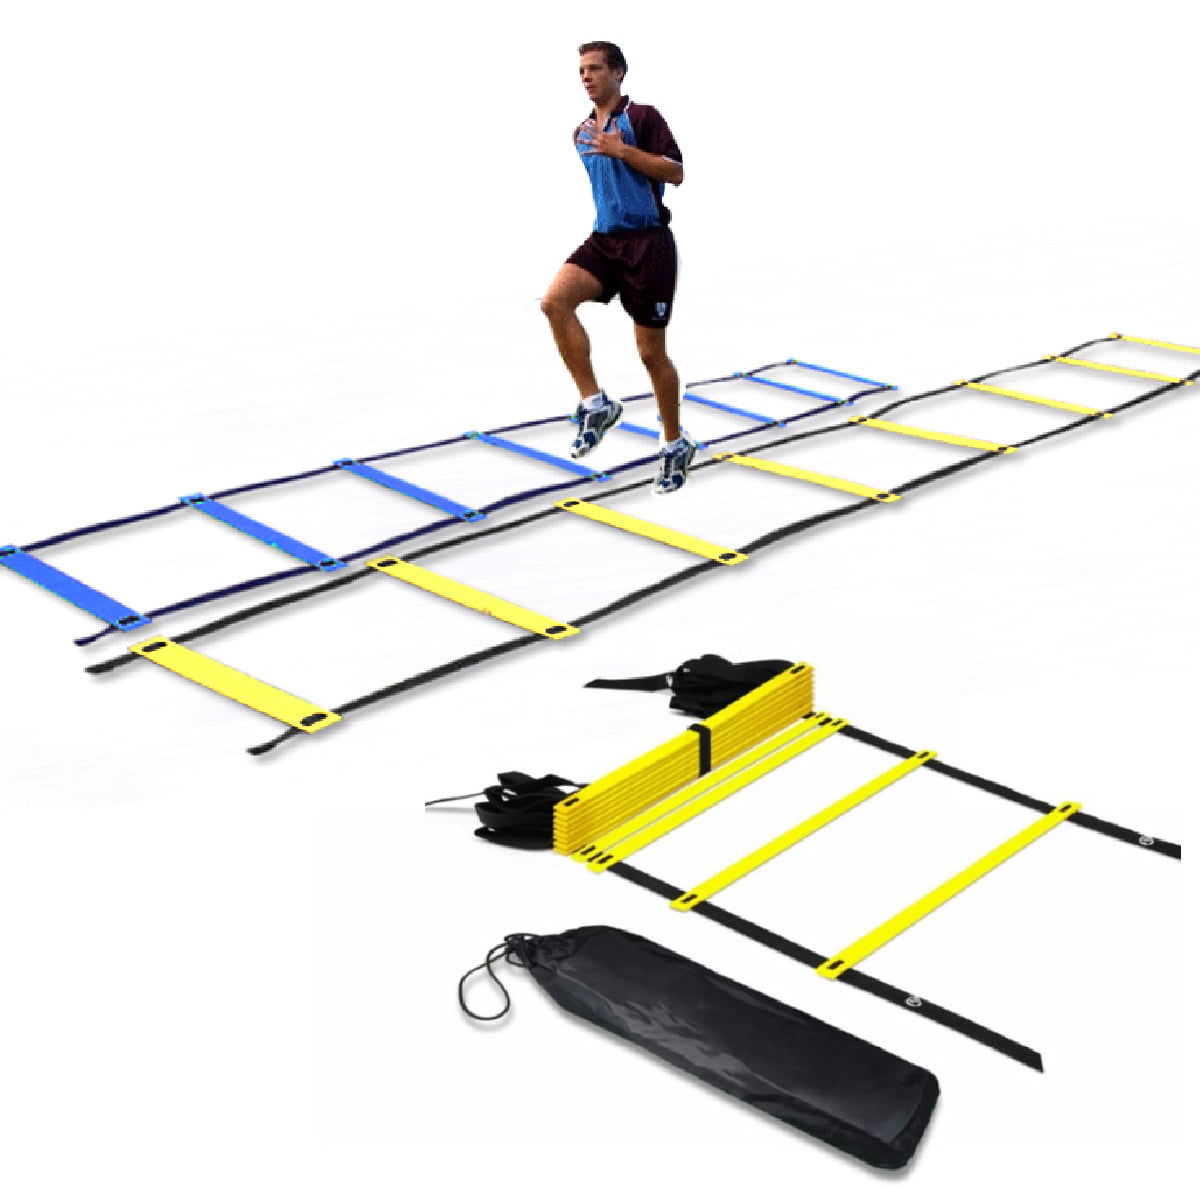 4M Speed Agility Ladder Fitness Training Soccer Sports Ladder Footwork Practise 